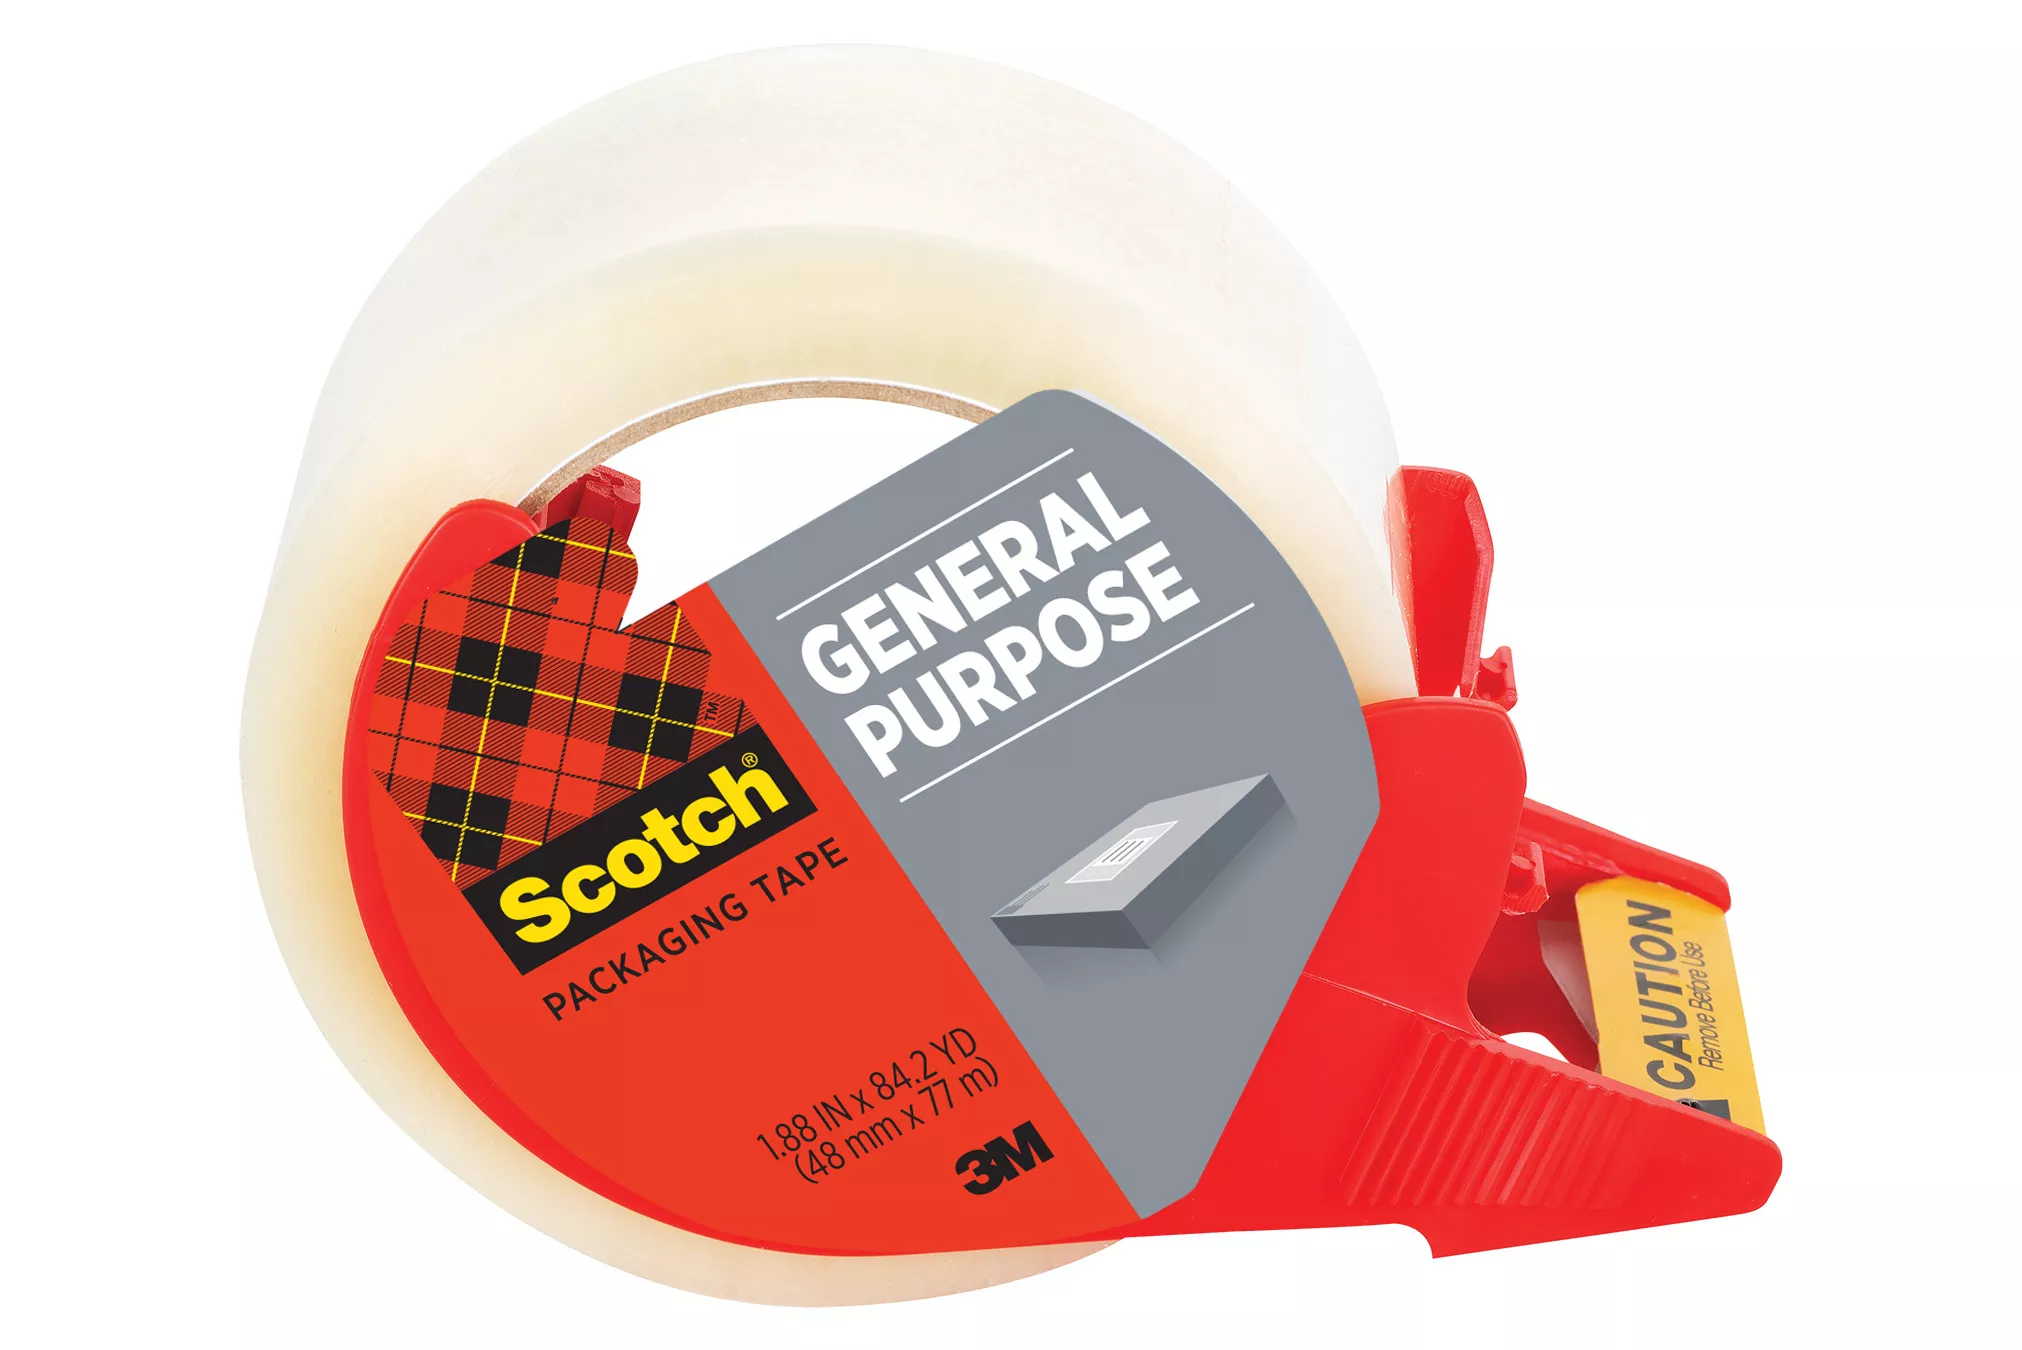 Scotch® Shipping Packaging Tape 3350-77-RD36GC, 1.88 in x 84.2 yd (48 mm x 77 m)